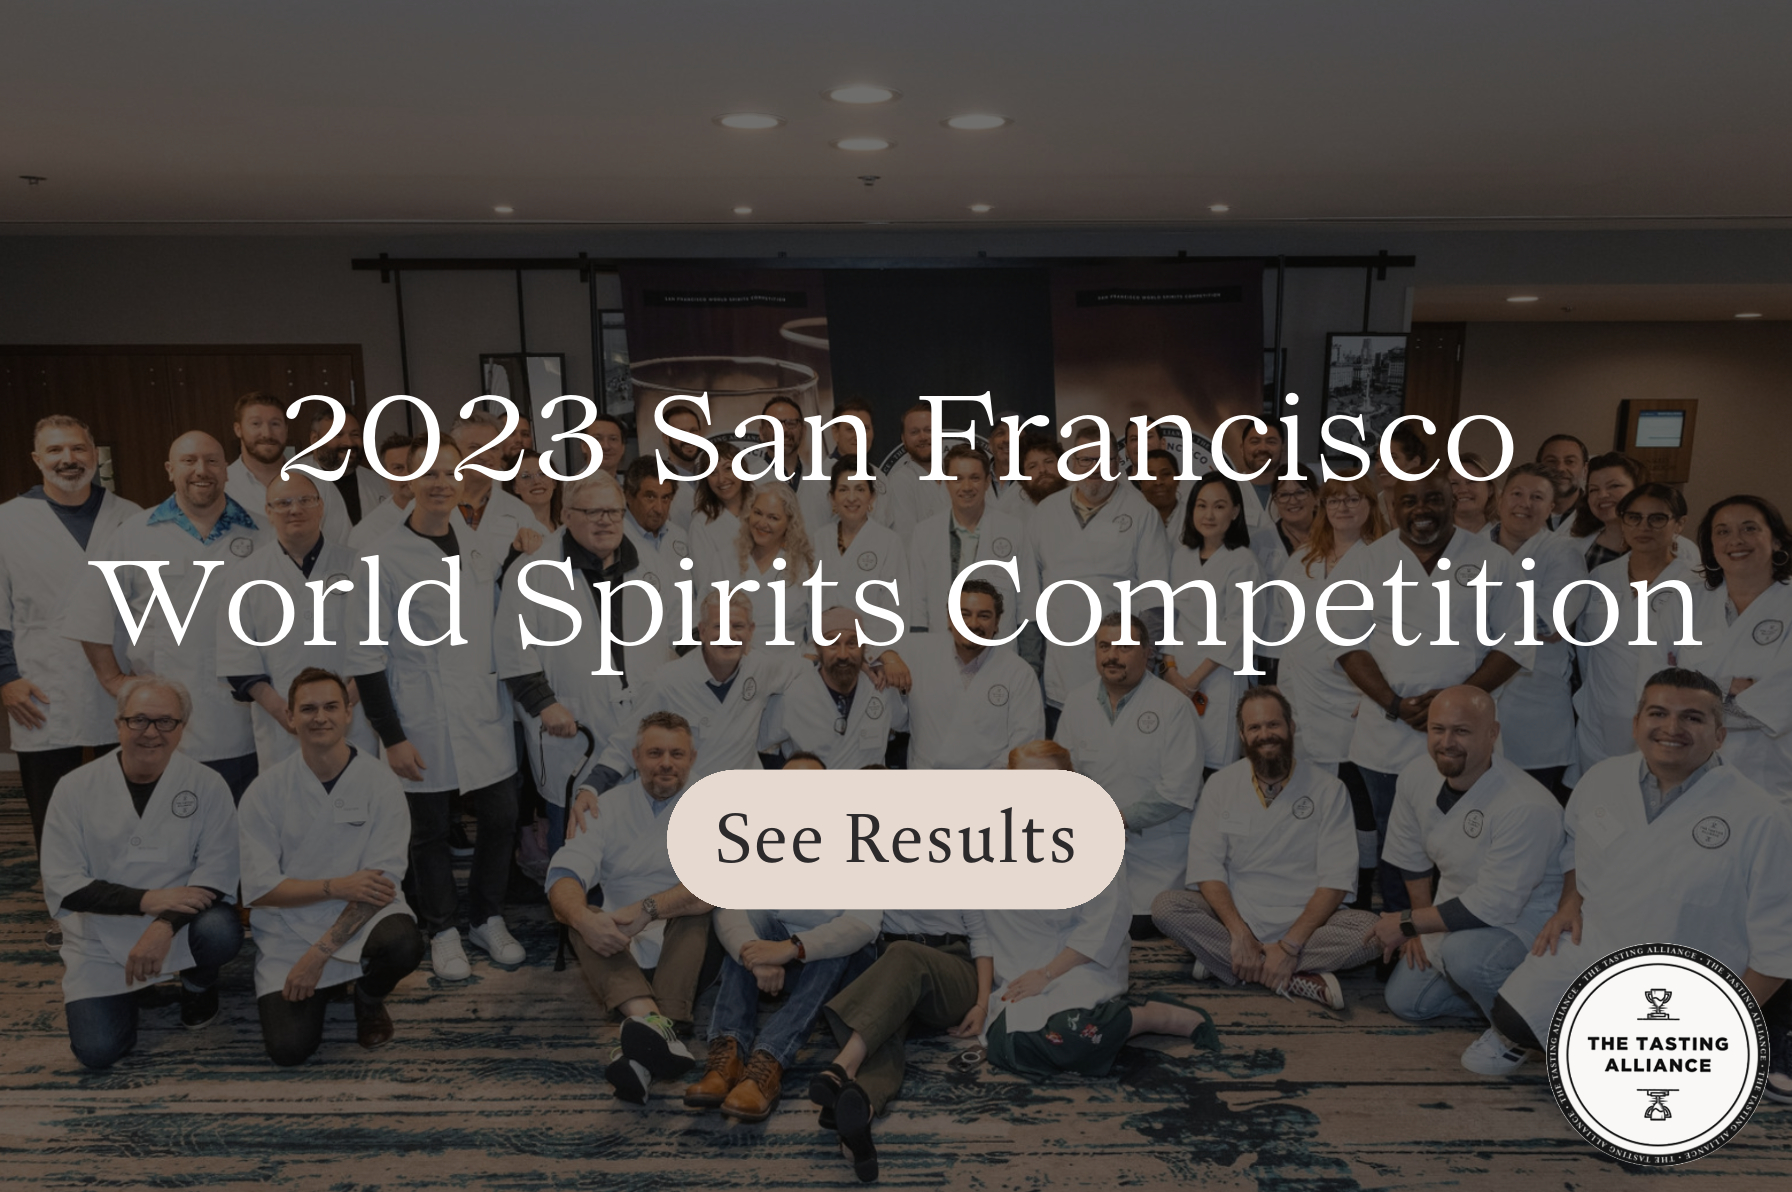 The results of The Tasting Alliance's 2023 San Francisco World Spirits Competition